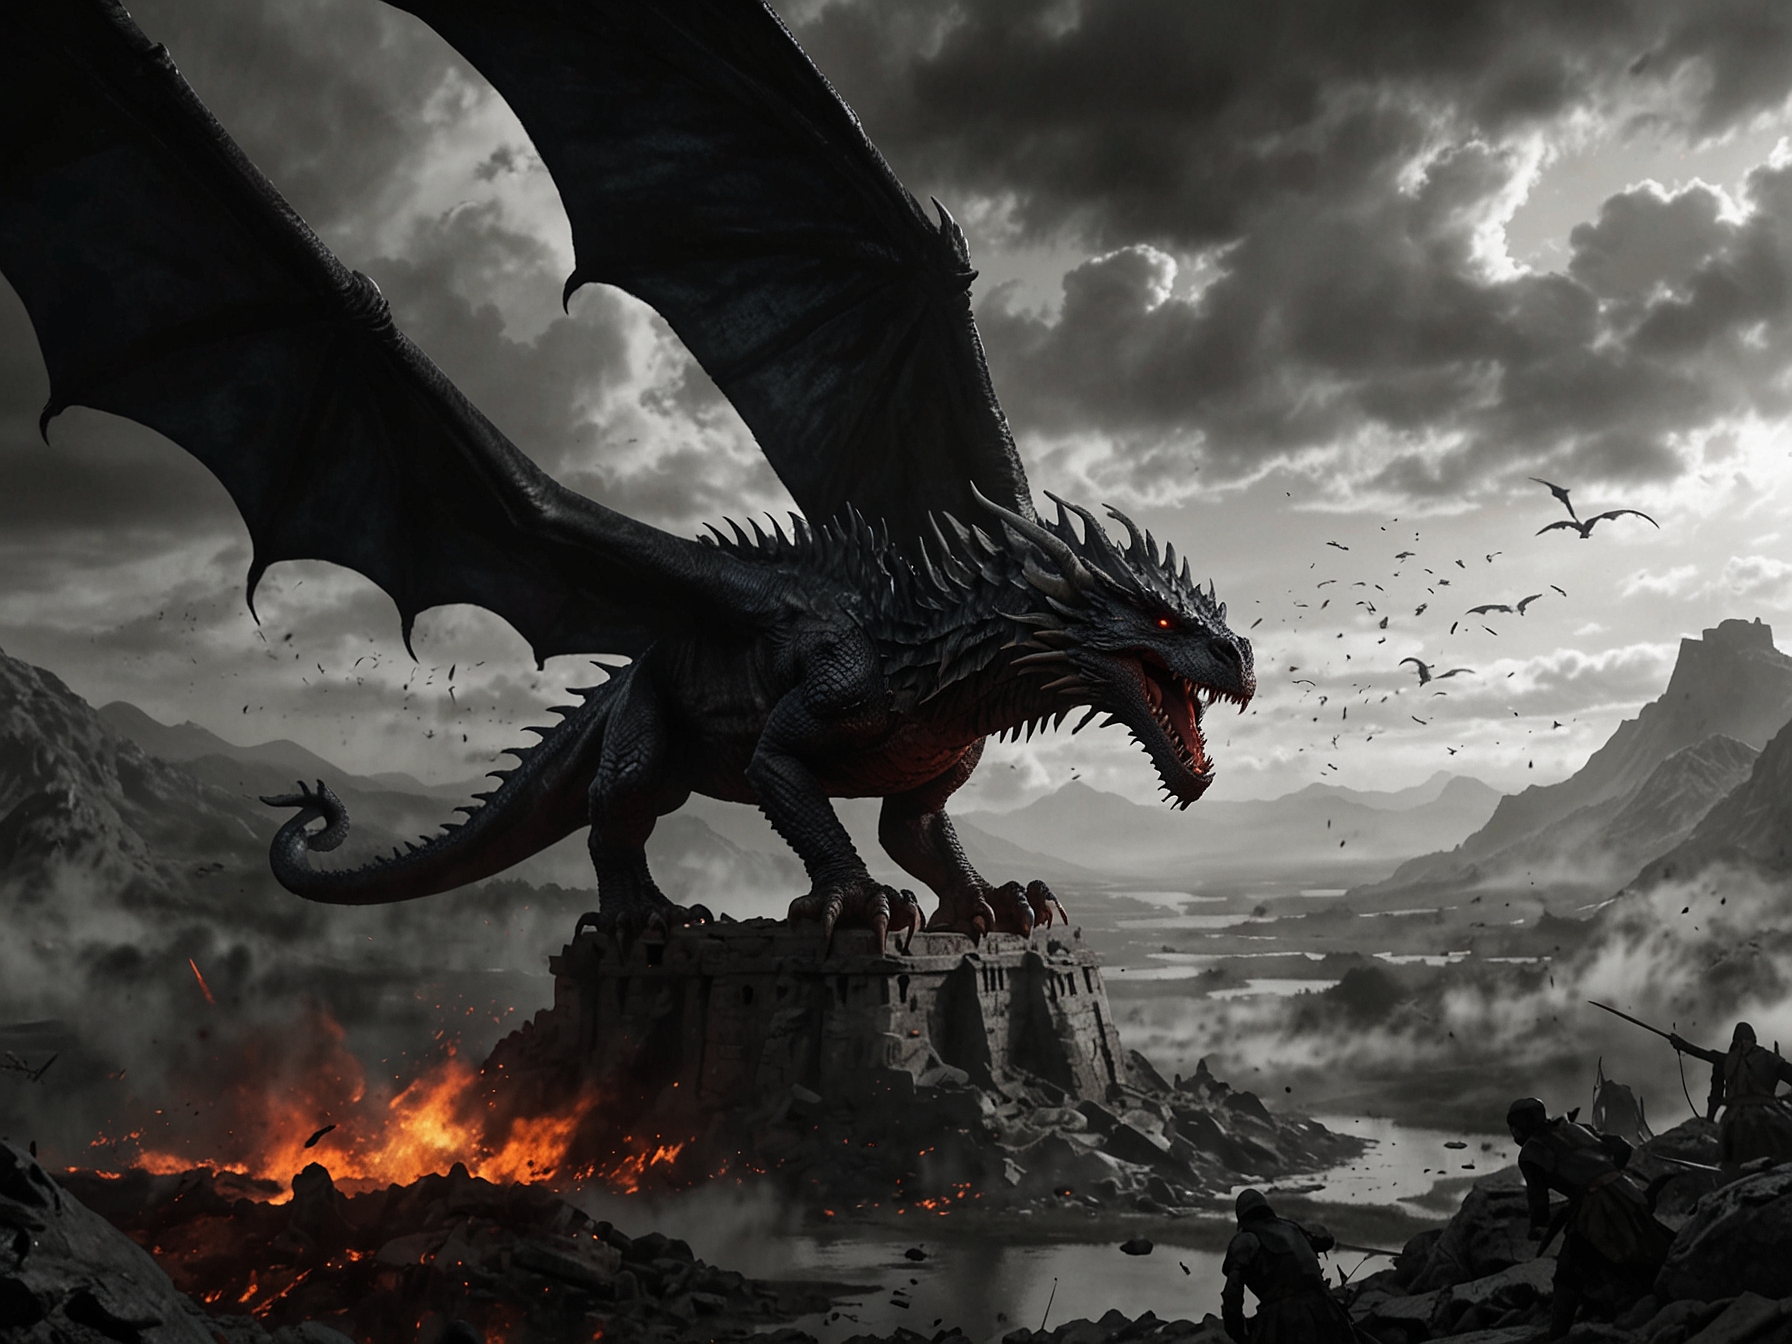 An epic scene from 'House of the Dragon' displaying the Targaryen dynasty's dragons soaring over a war-torn battlefield, hinting at the political intrigue and drama of the next season.